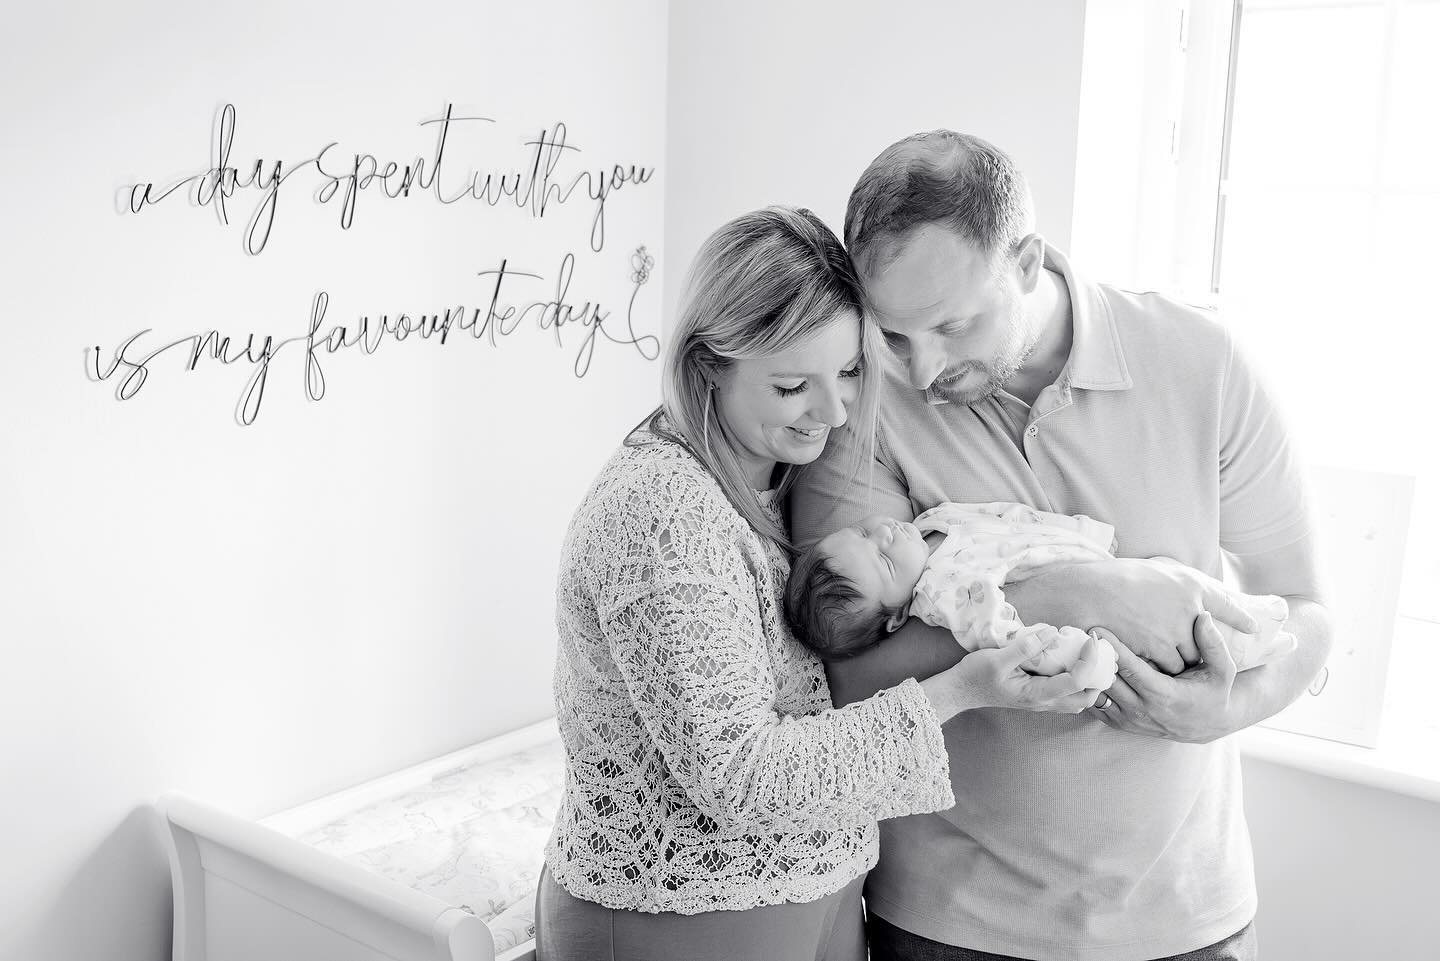 Ahhhh the lovely Skeels family! They were in front of my camera yet again as I had the absolute honour of capturing another landmark moment in their lives - the newborn bubble with baby Rae 🥰

I first photographed Bradley &amp; Jessica on their wedd